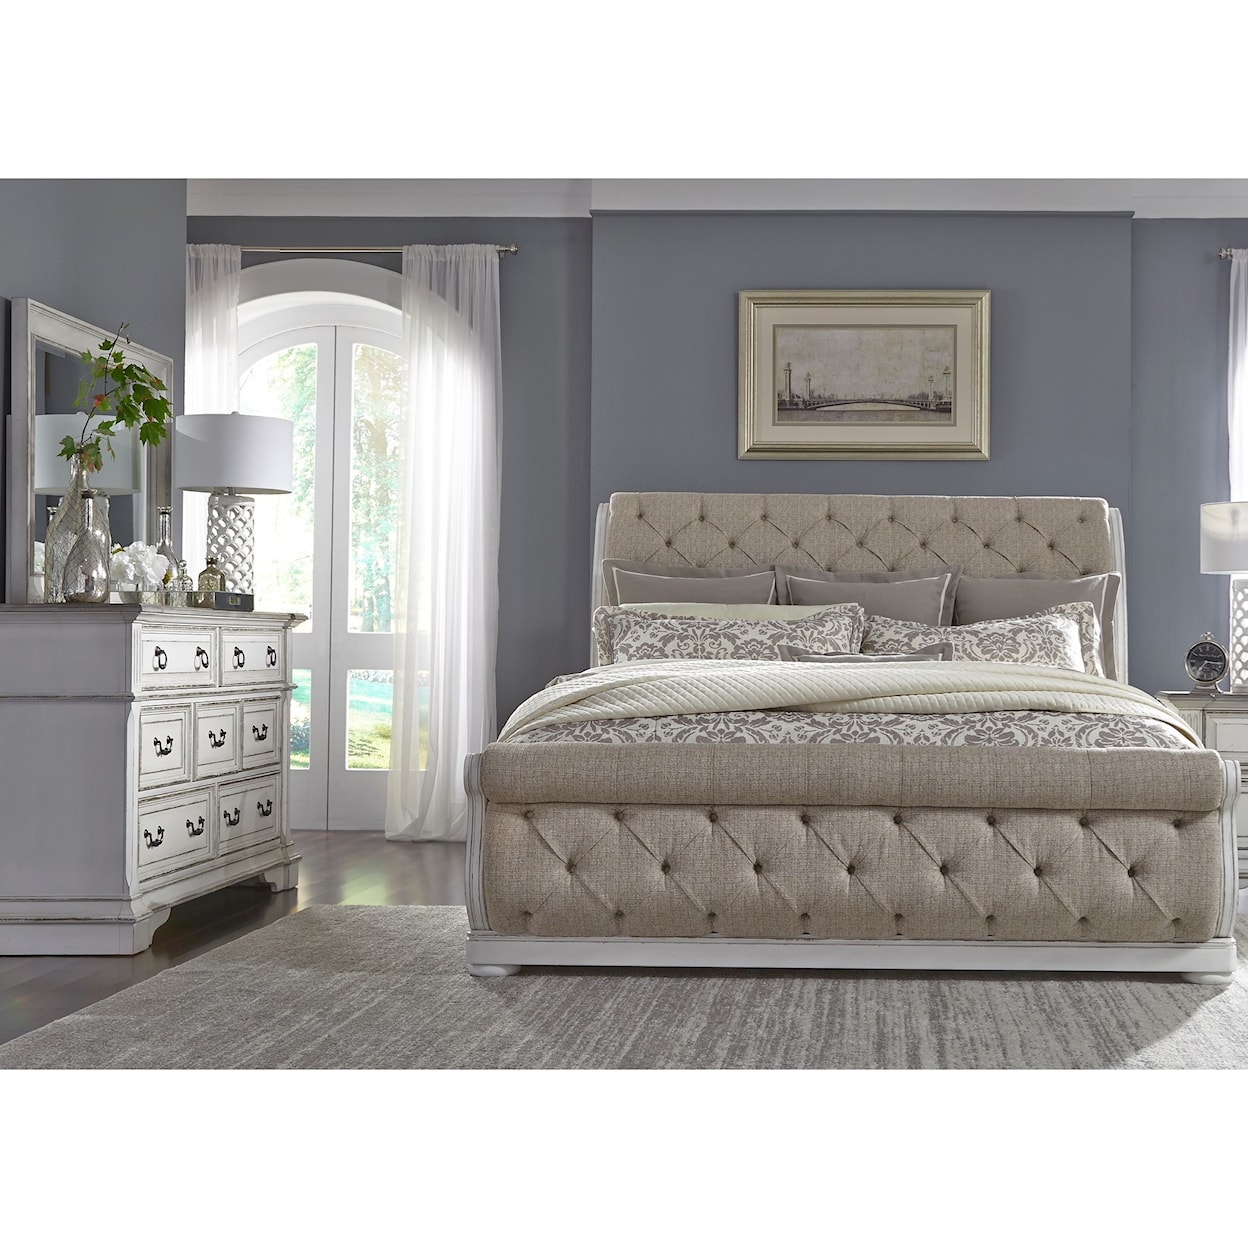 Liberty Furniture Abbey Park California King Bedroom Group